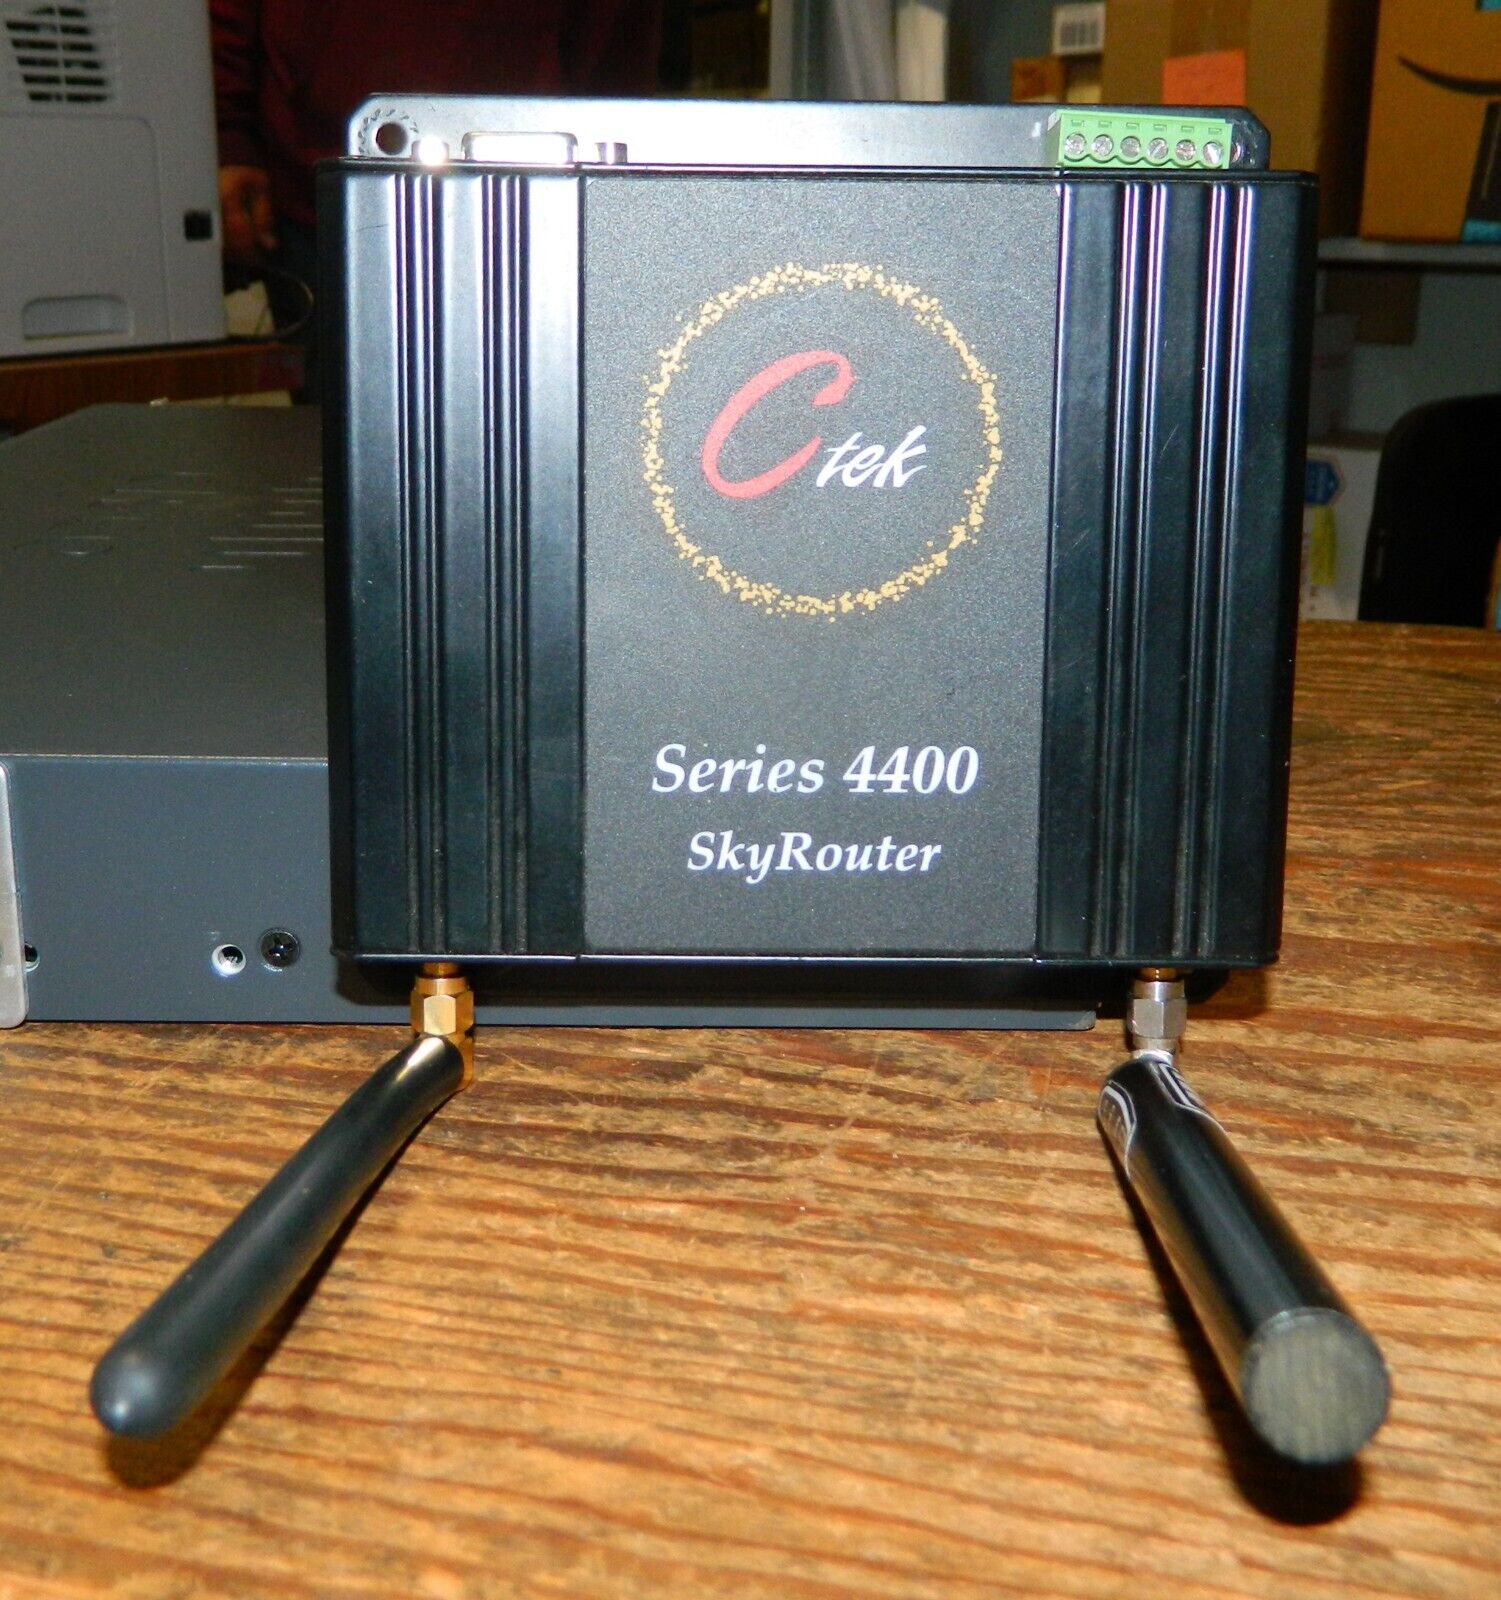 CTEK Z4400006 SKYROUTER / CELLULAR ROUTER SERIES 4400 Z4400 WITH GPS